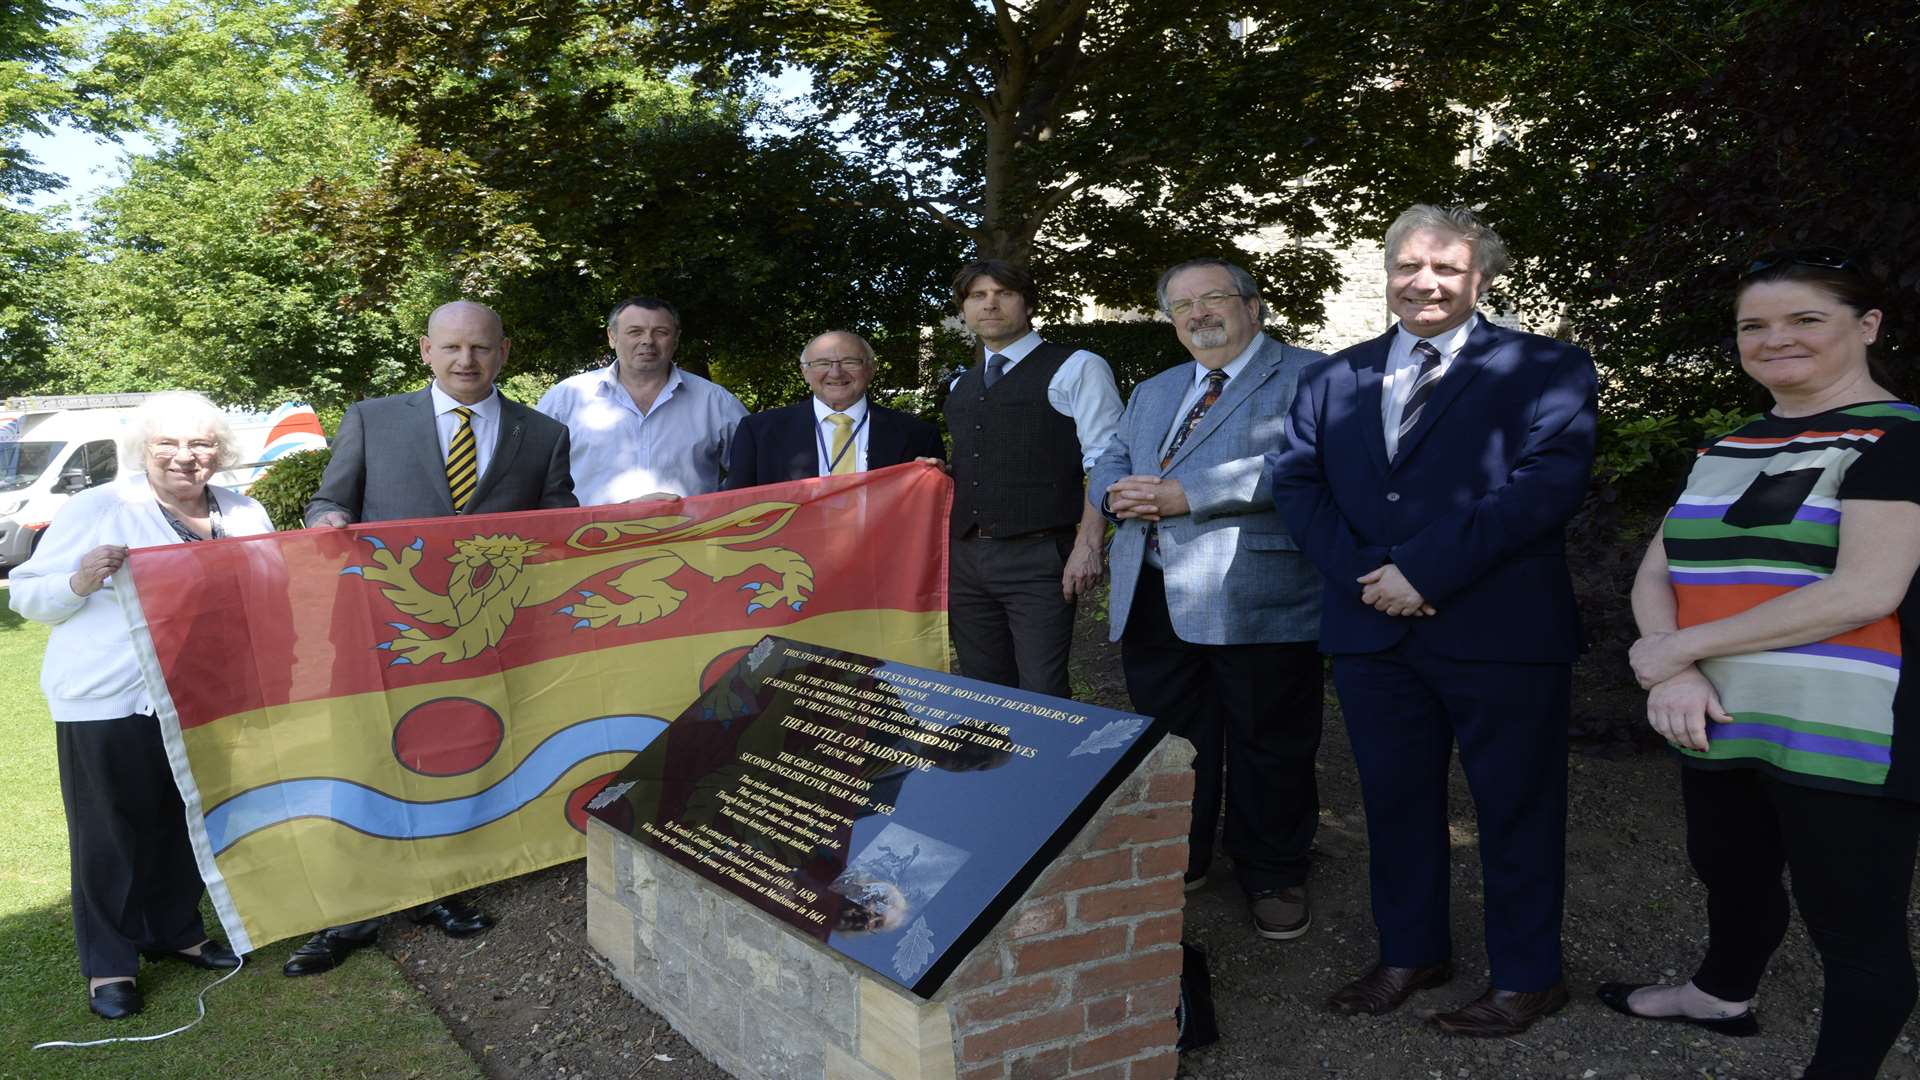 Cllr Fran Wilson, Cllr David Naghi, Ian Acott, Cllr Gordon Newton, Cllr Tony Harwood, Cllr David Pickett, Cllr Clive English and Rachael Hancock at the unveiling of the Battle of Maidstone Memorial on Thursday morning. Picture: Chris Davey FM4794957